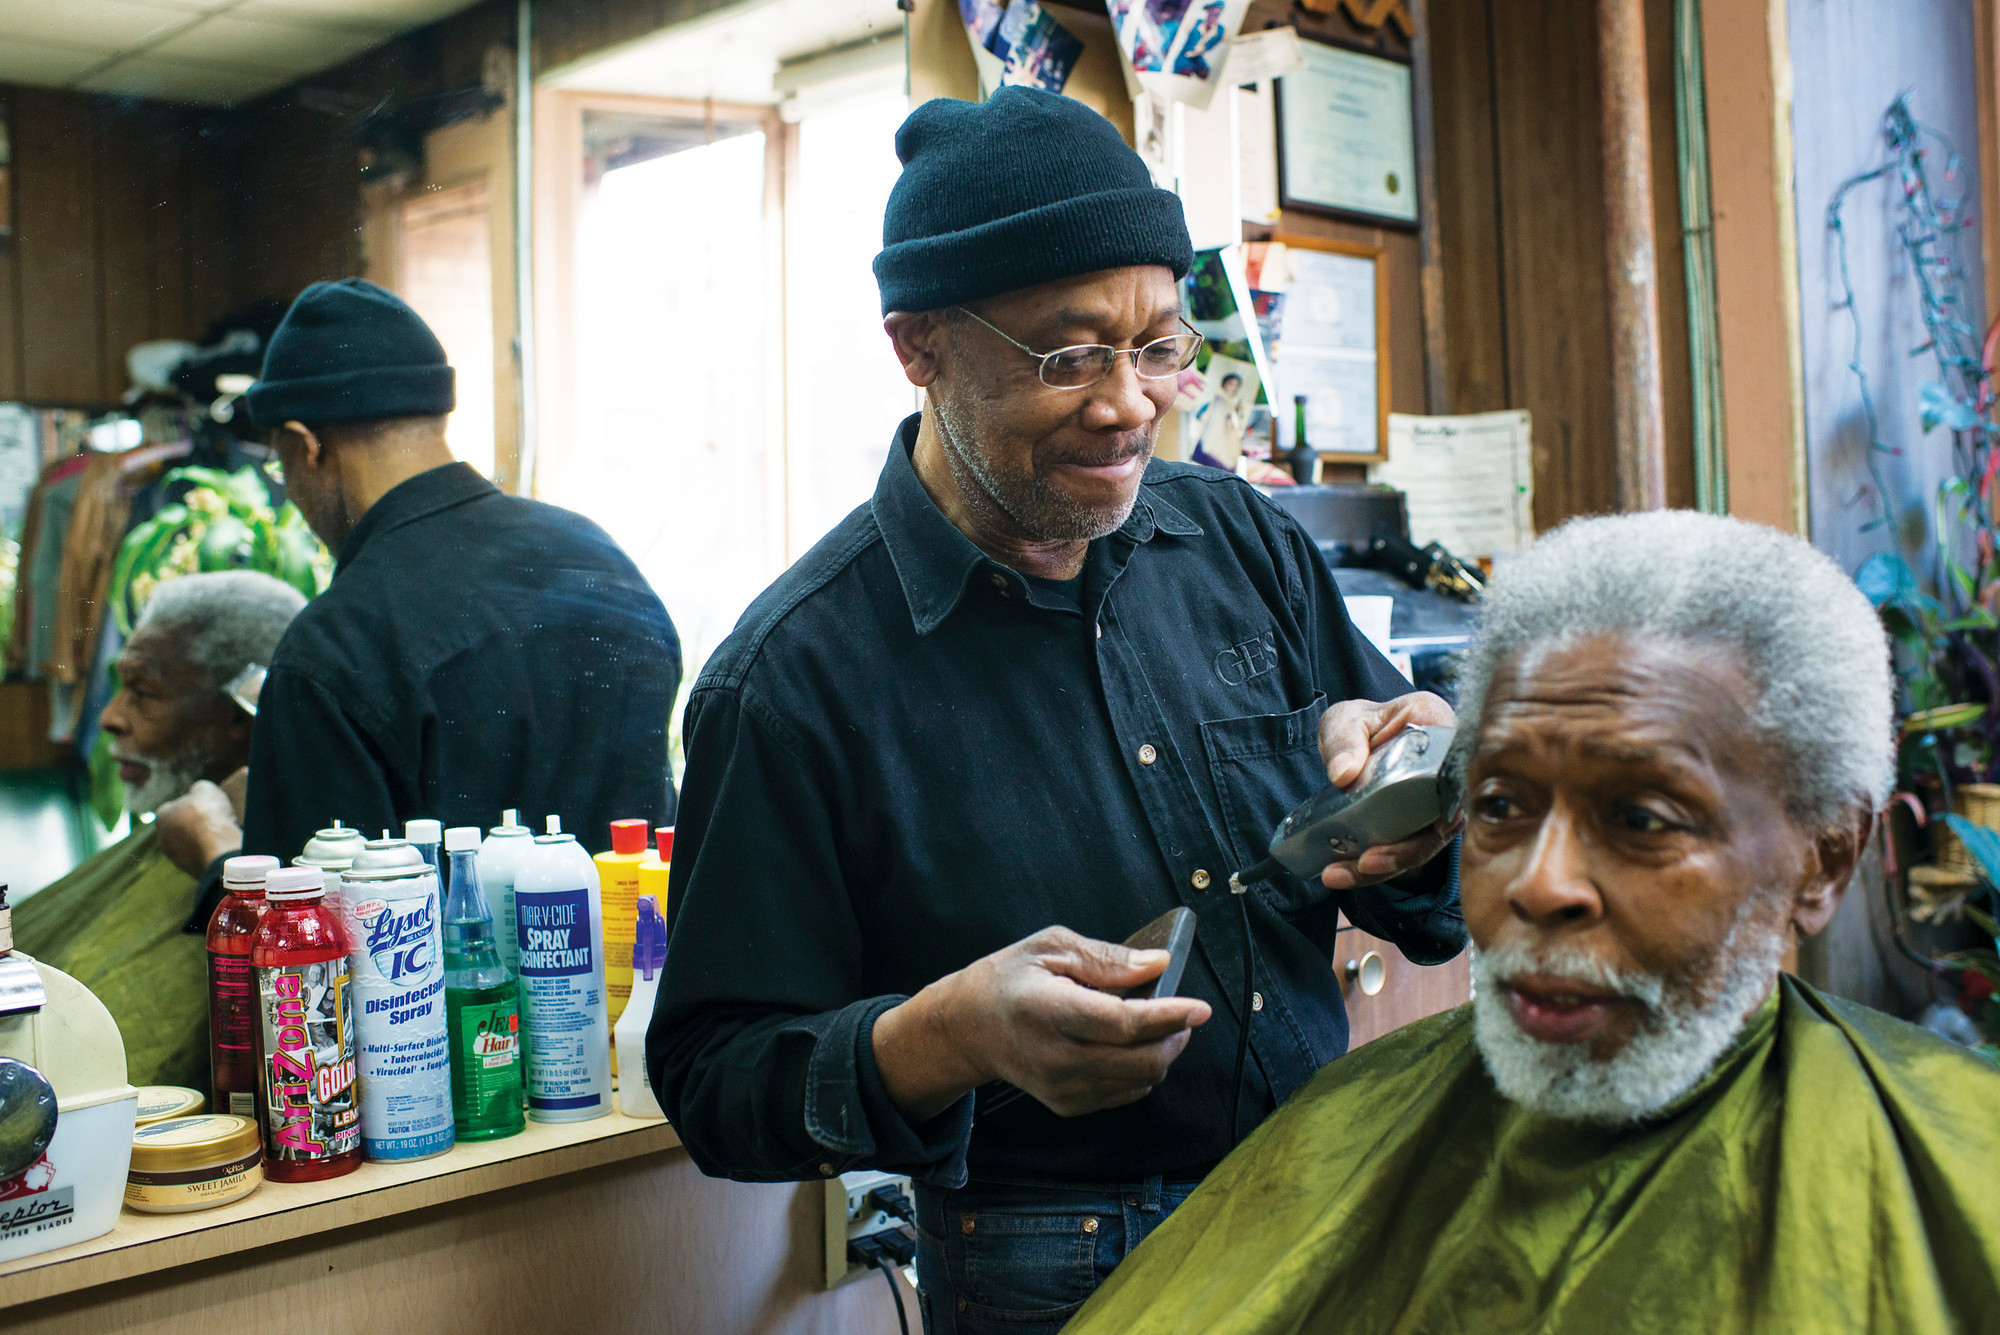 Roosevelt "Rosey" Spivey, 75, cuts hair at his 53-year-old barbershop, the Marble Hill International Unisex Salon, on Jan. 15, 2015.